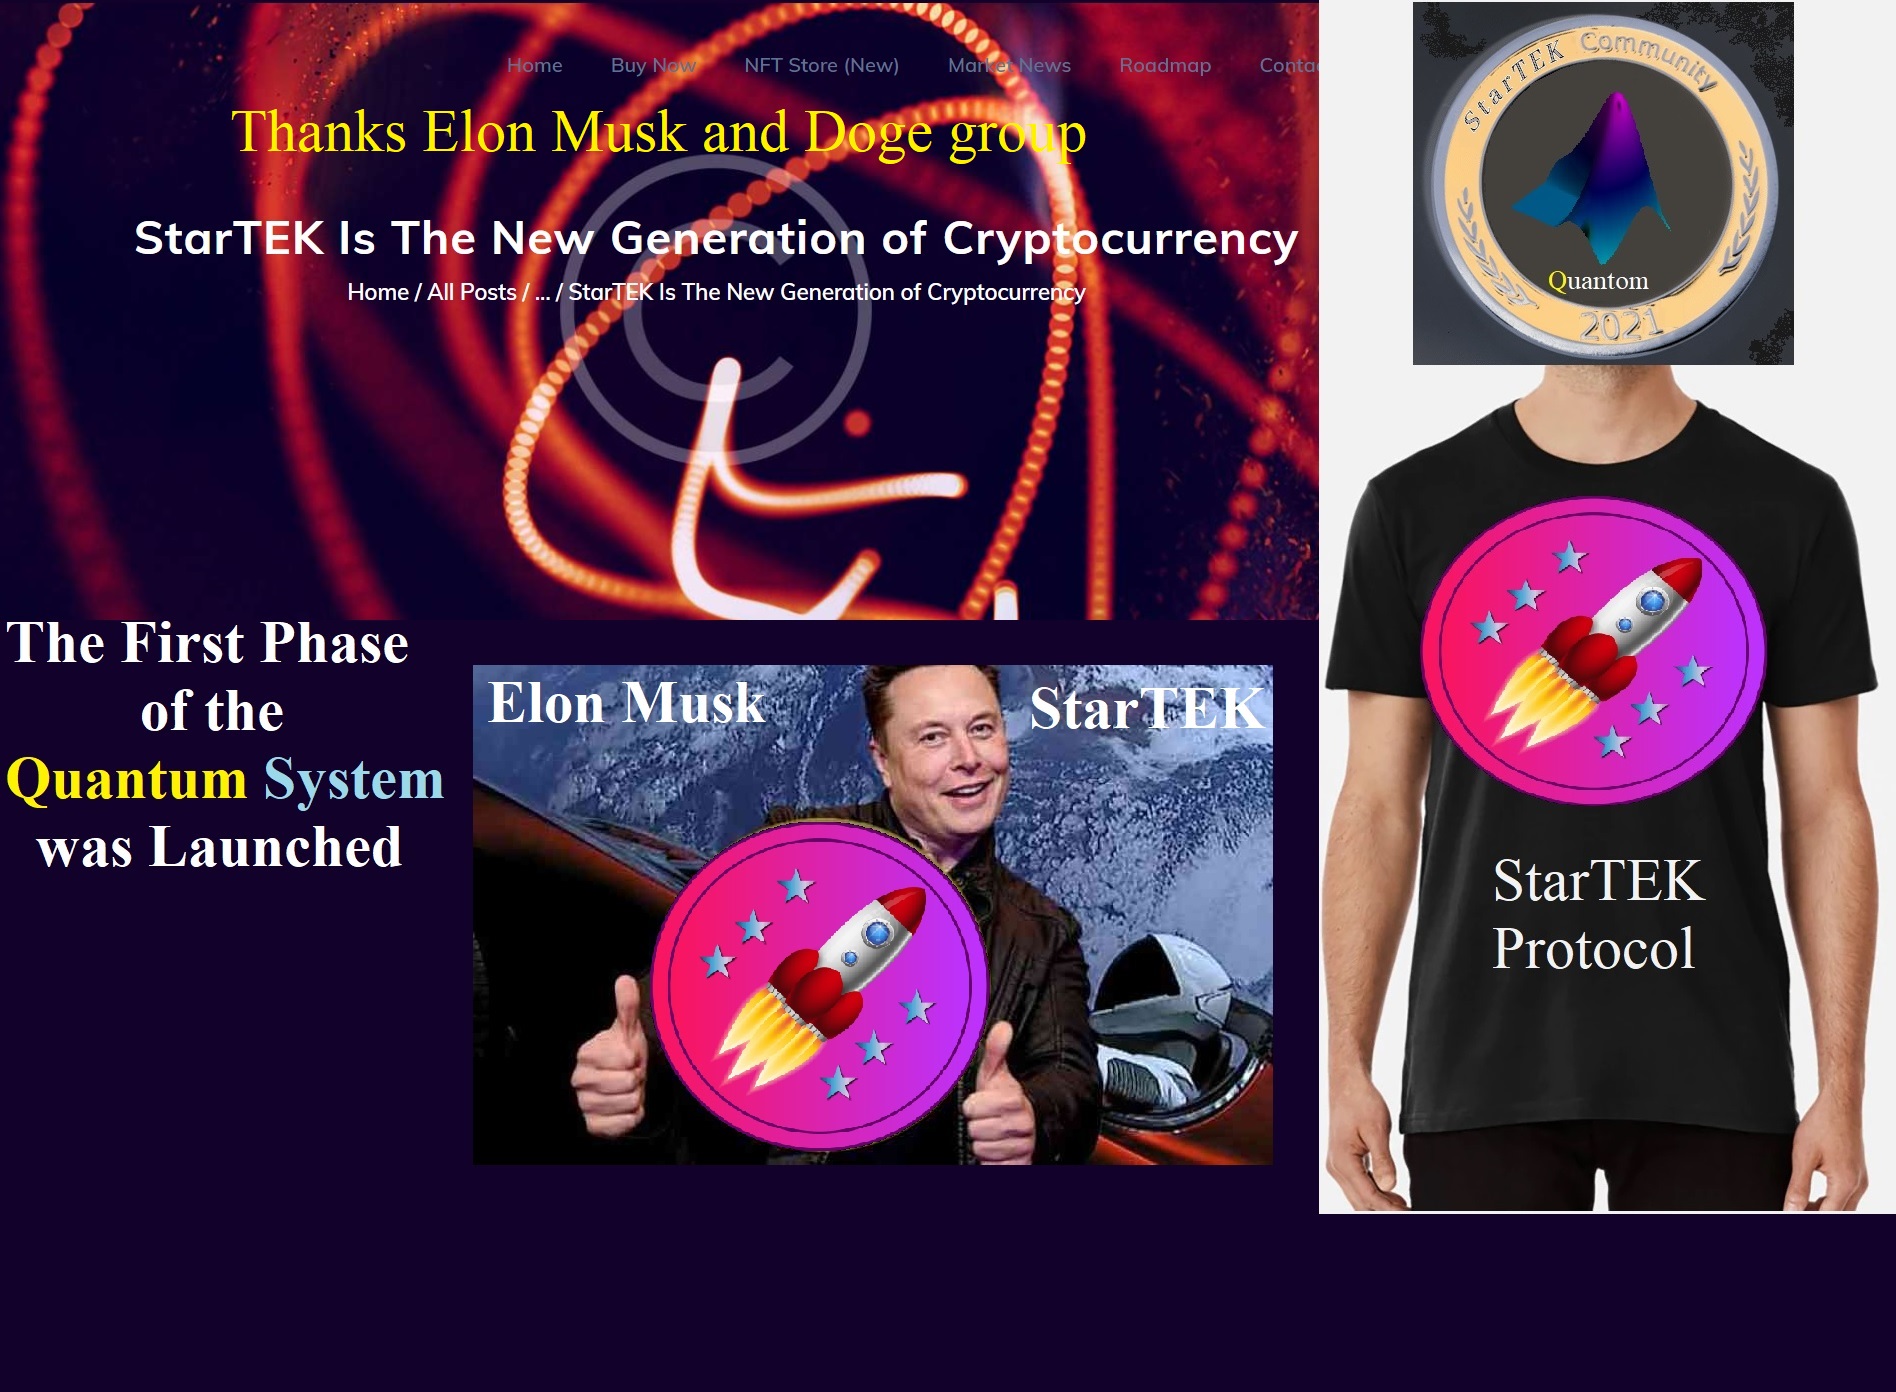 startek-team-will-create-the-next-generation-of-cryptocurrency-quantum-system-with-cooperation-of-elon-musk